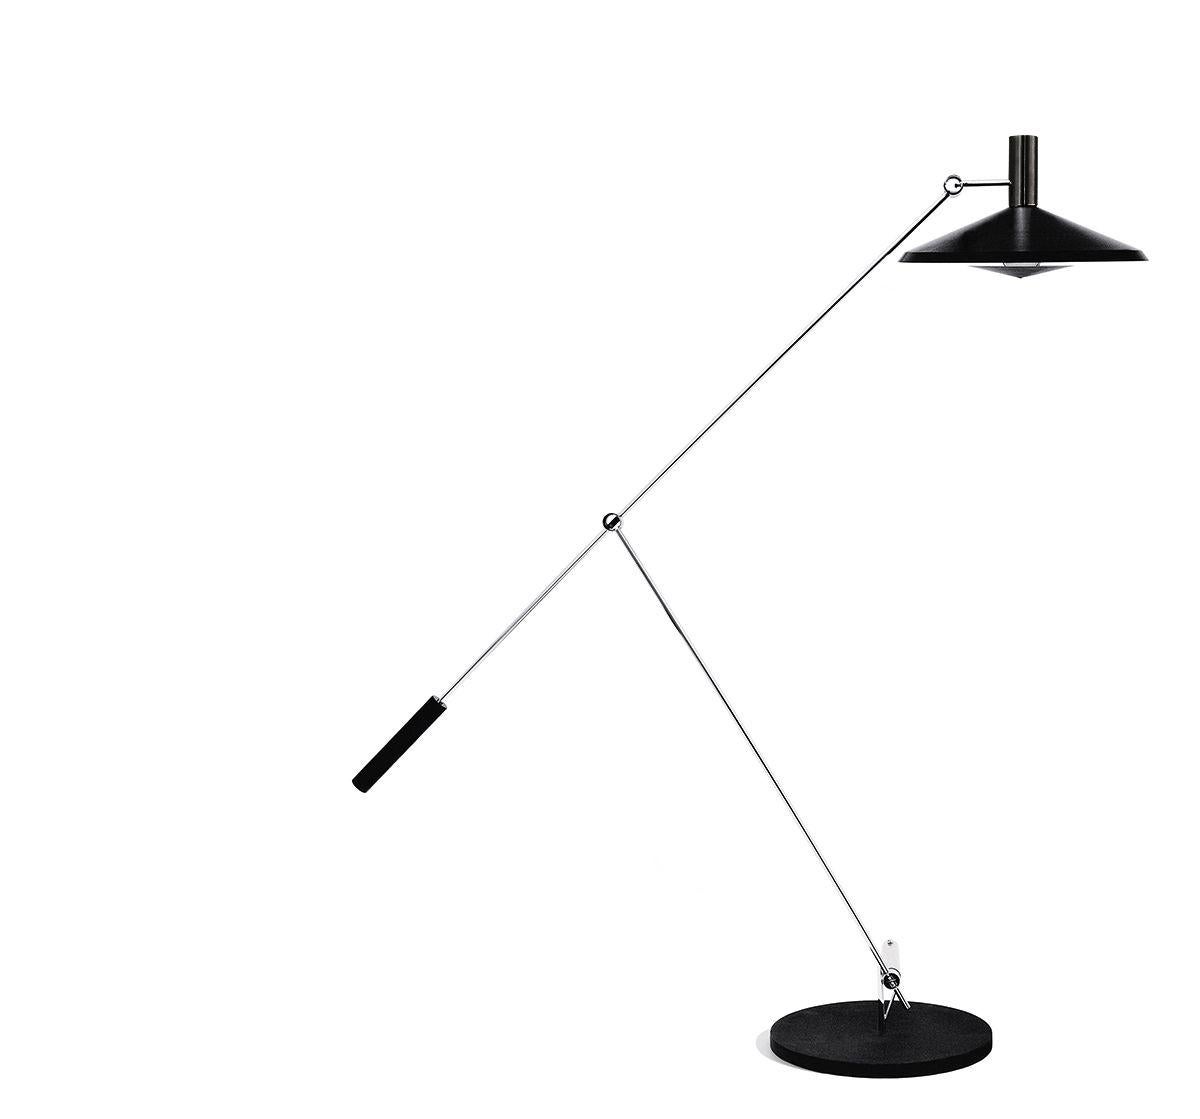 Rosmarie & Rico Baltensweiler type 600 floor lamp 1951. Switzerland, current production.

The Swiss lighting company Baltensweiler is a real family business that has been making special quality lamps since 1951. The Type 600 was their first lamp